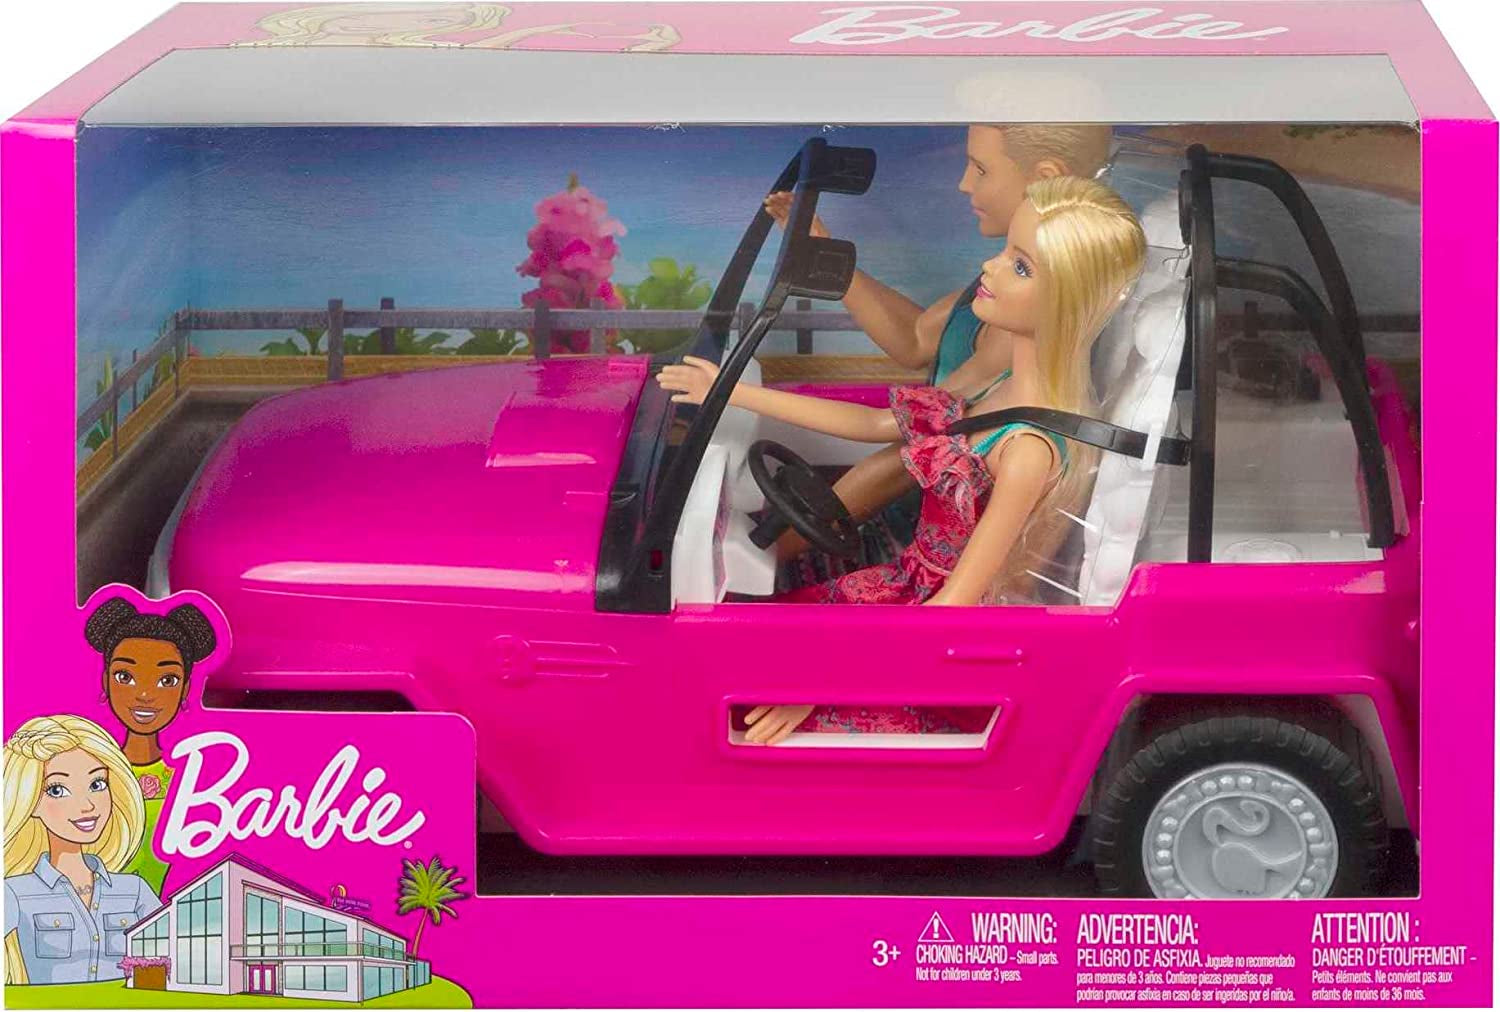 "Barbie and Ken's Stylish Beach Cruiser: A Pink Convertible for Fun in the Sun!"